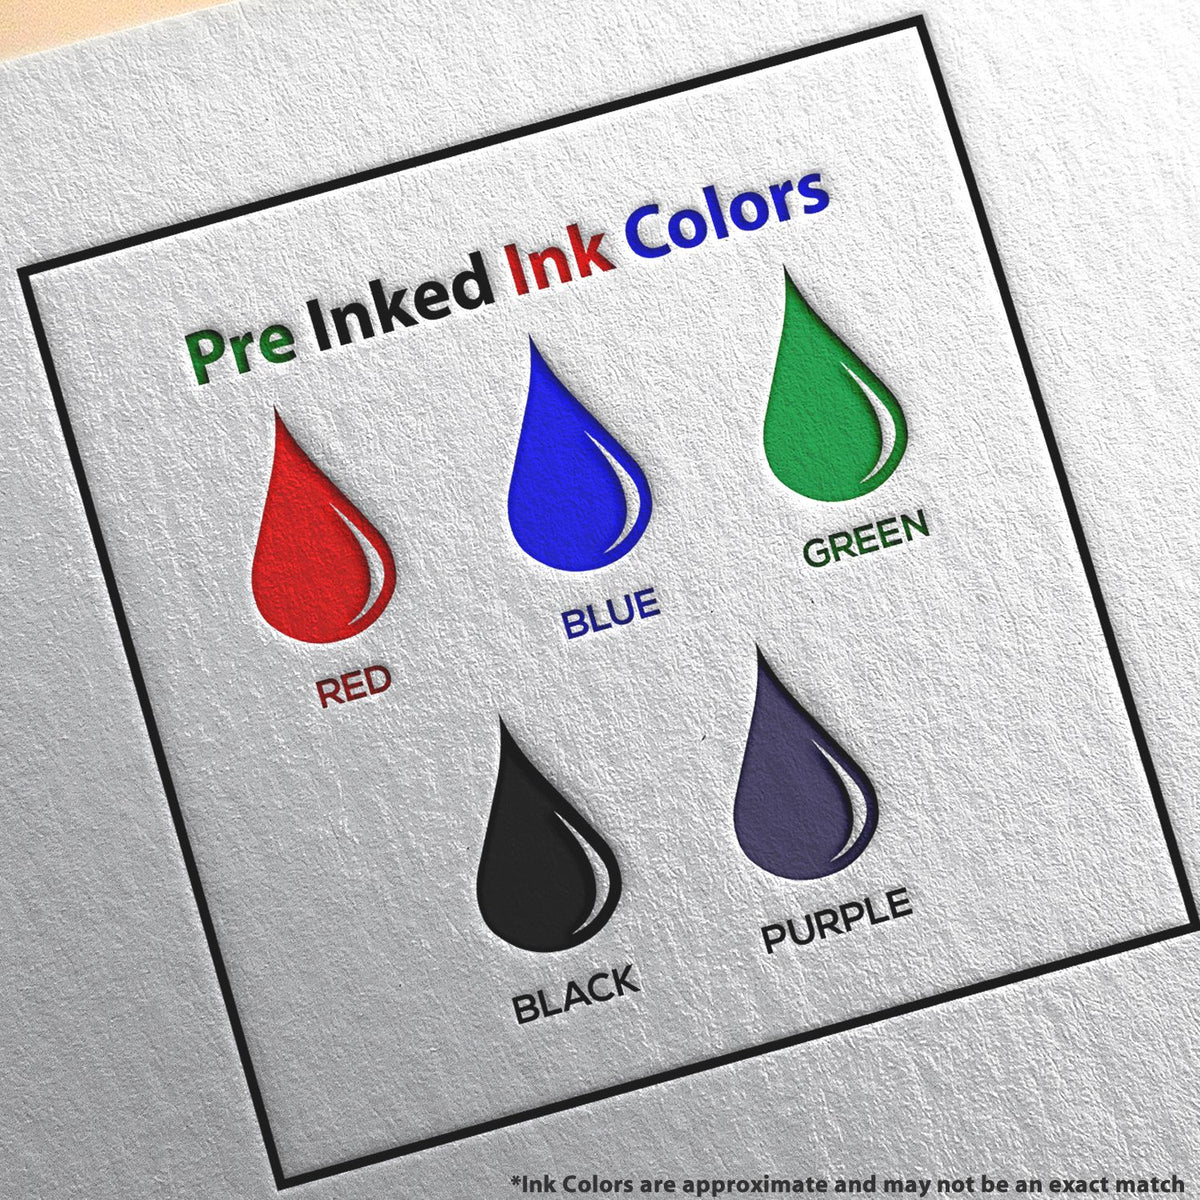 A picture showing the different ink colors or hues available for the Super Slim Maine Notary Public Stamp product.